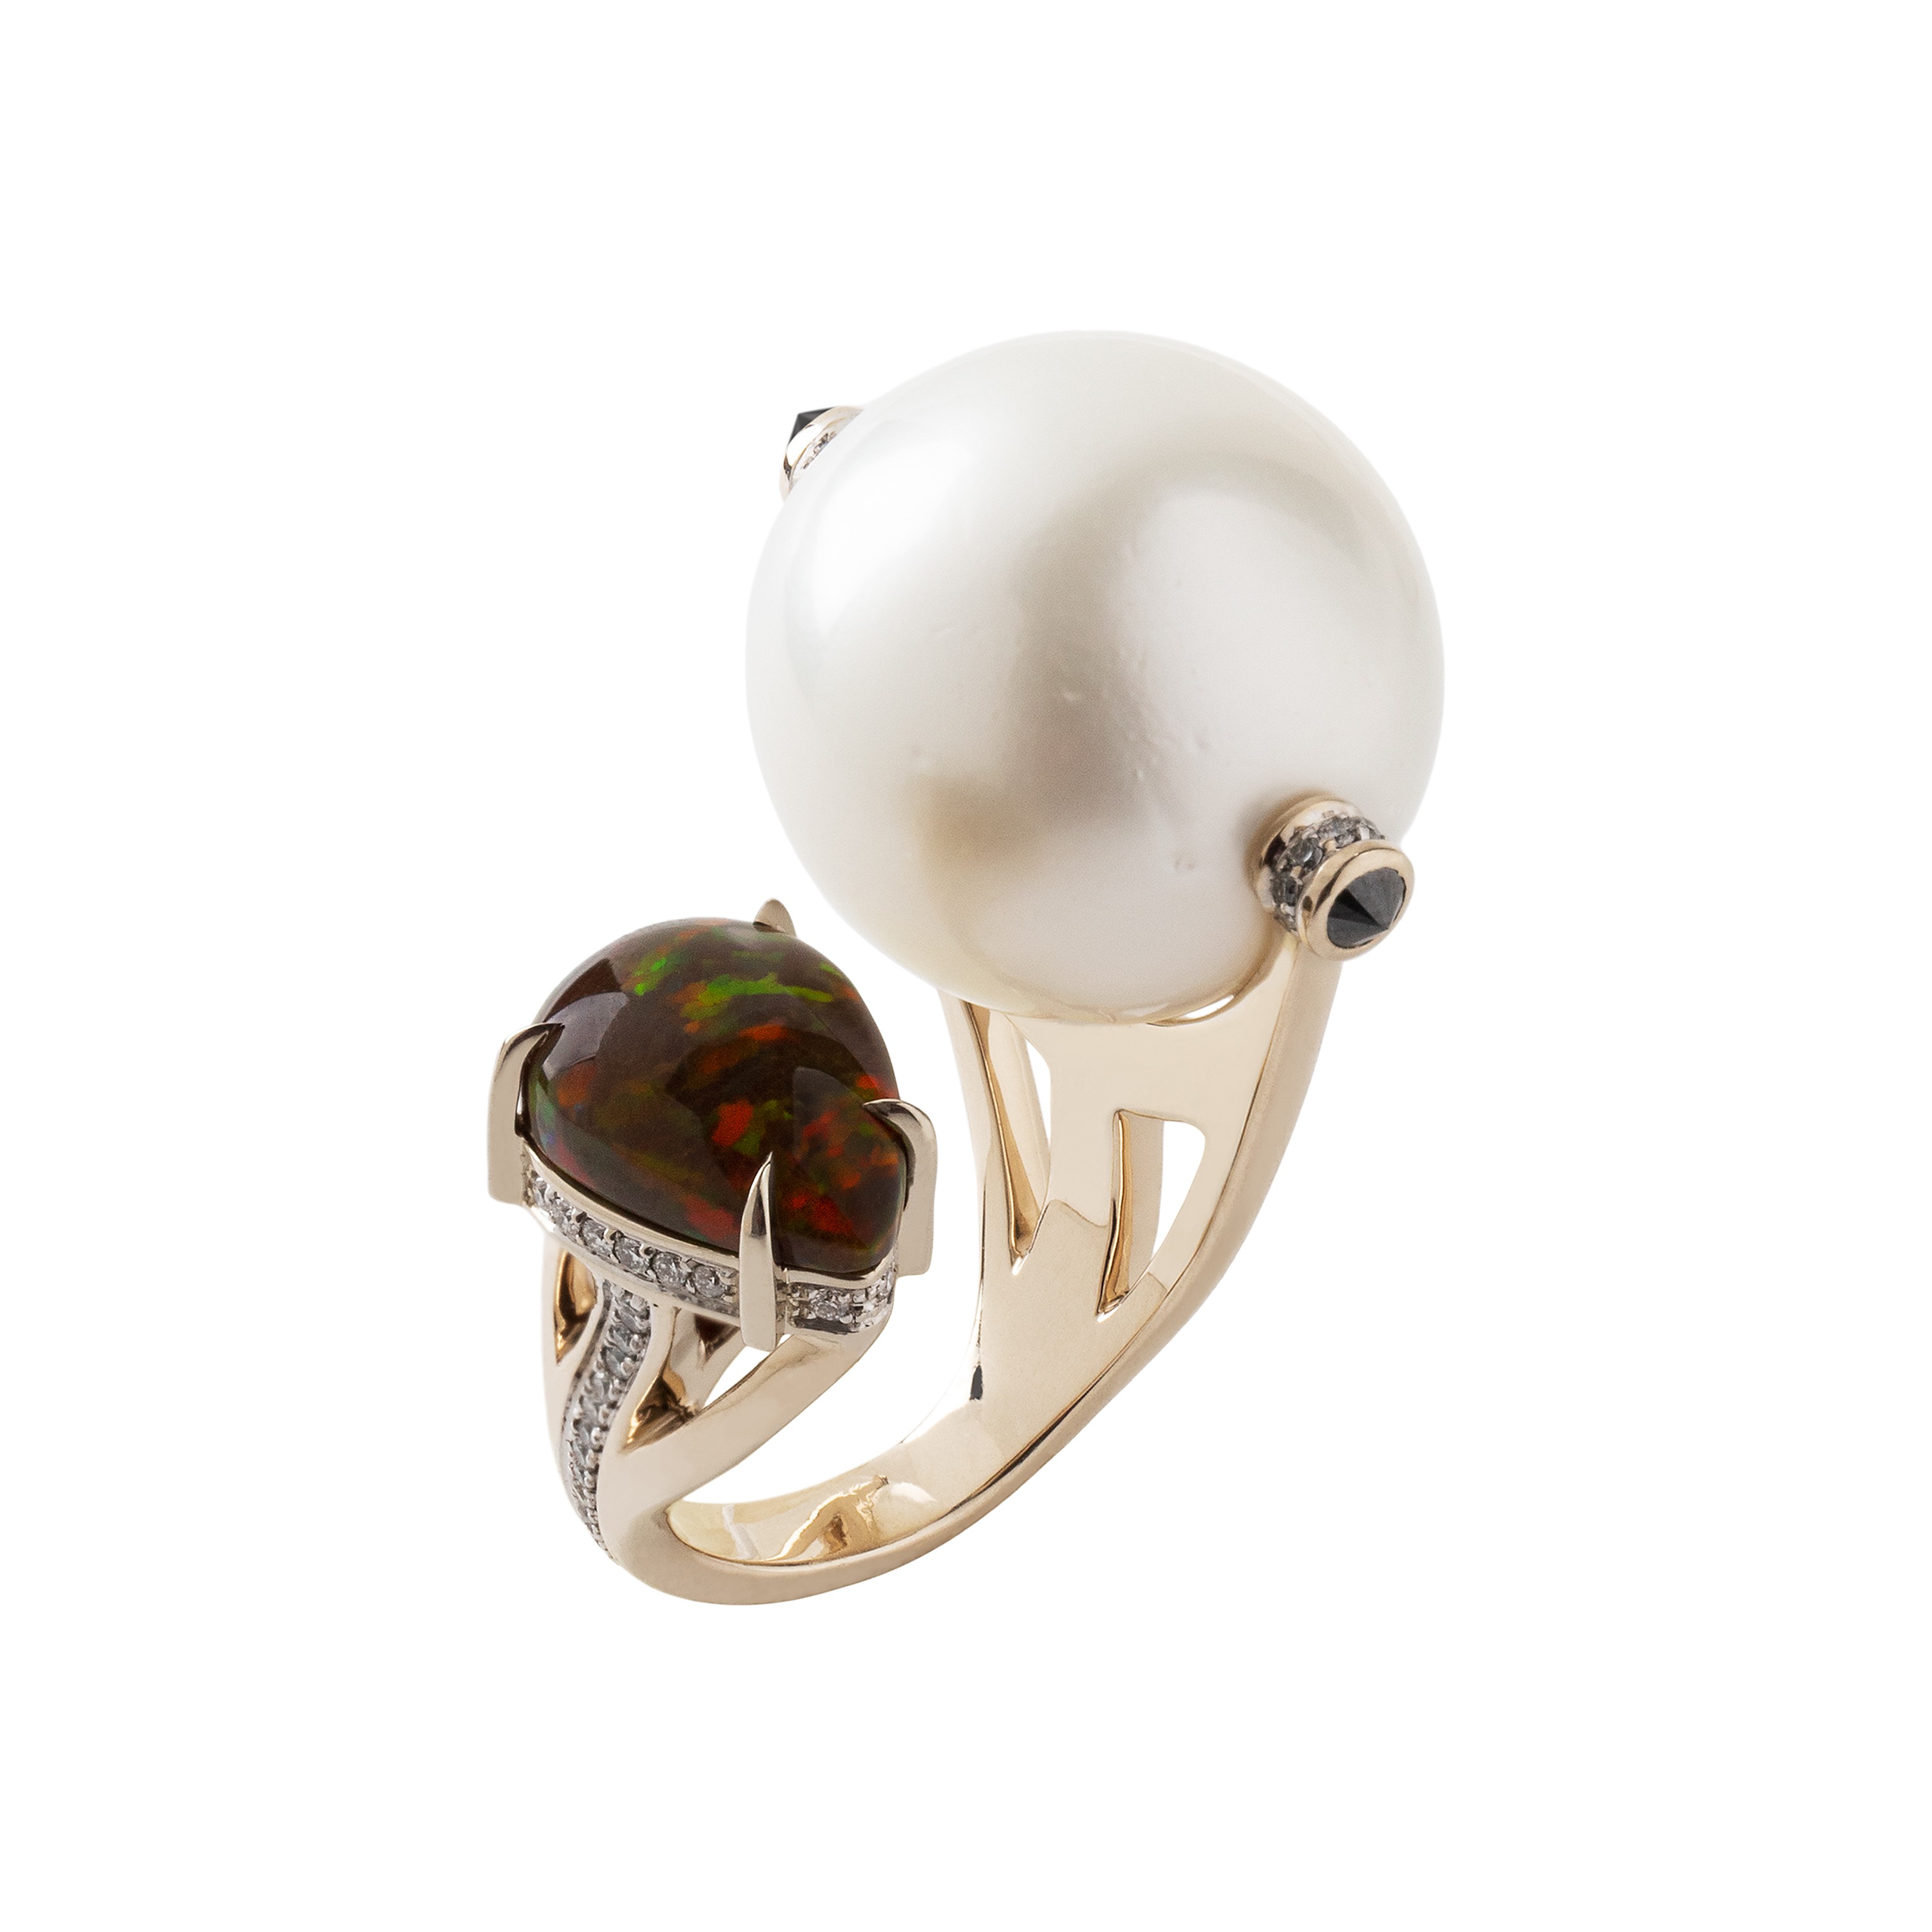 South Sea Pearl open ring with opal, inverted black diamonds and white diamonds in 18k white gold. 571